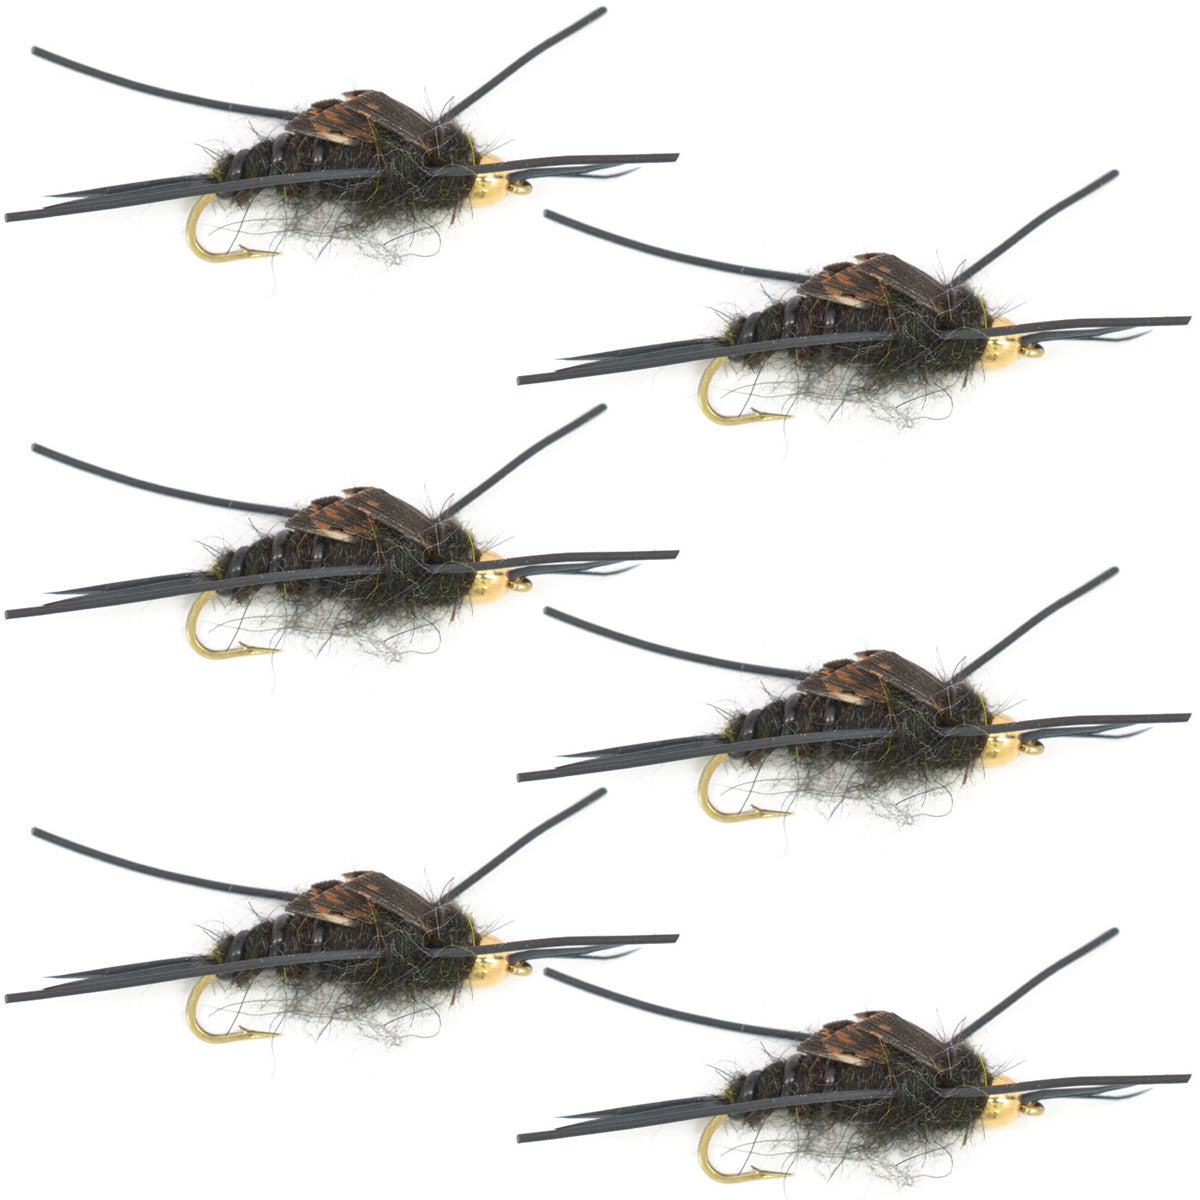 Tungsten Bead Kaufmann's Black Stone Fly with Rubber Legs - Stonefly Wet Fly - 6 Flies Hook Size 6